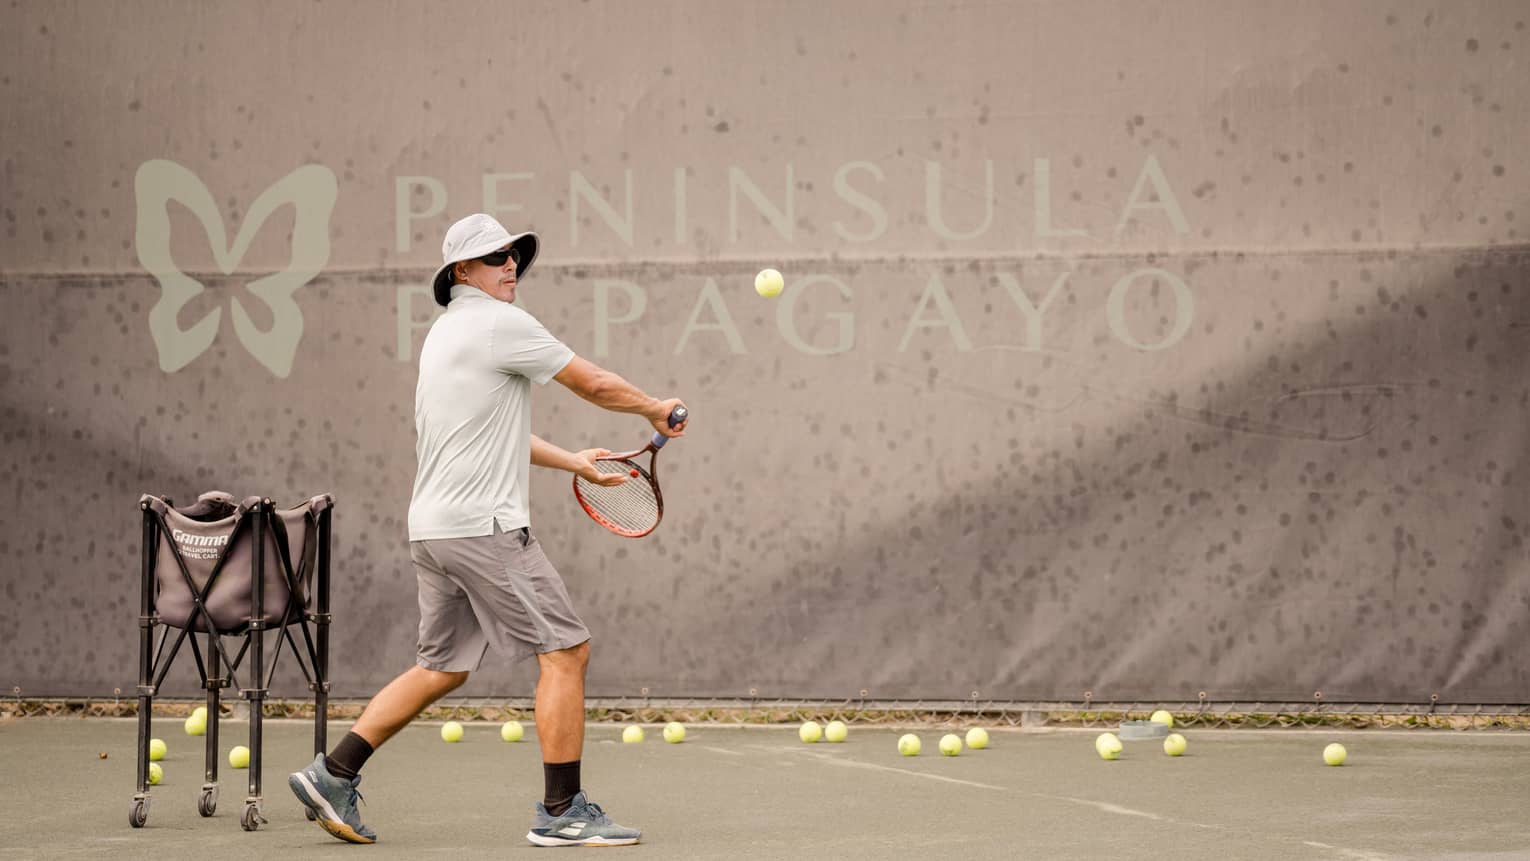 Standing on a clay tennis court beside a ball hopper, balls scattered across the ground, a player prepares to hit a backhand.